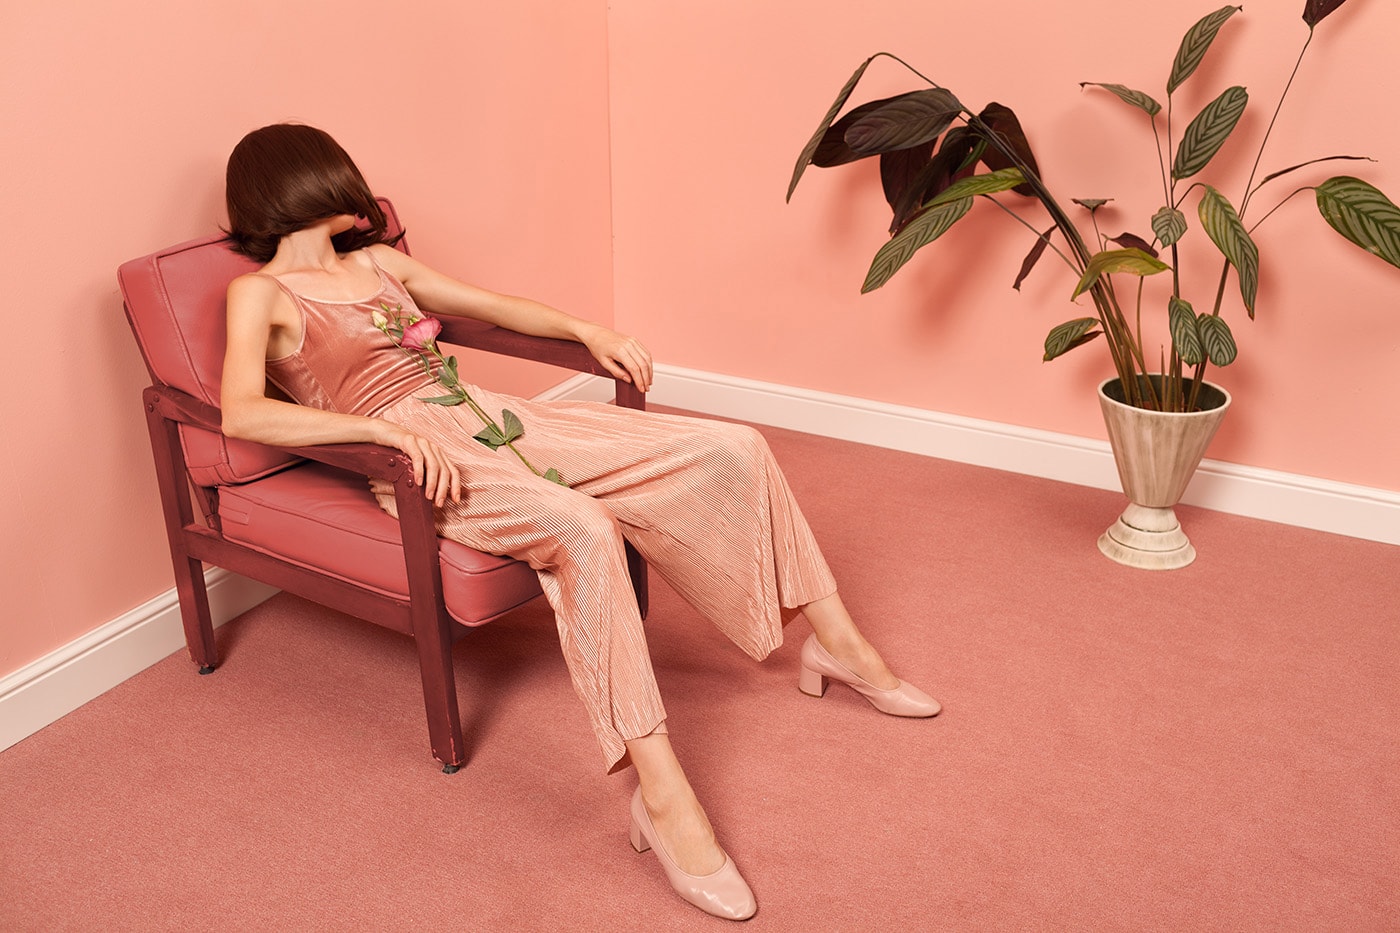 Woman Sitting On An Armchair In A Pink Room